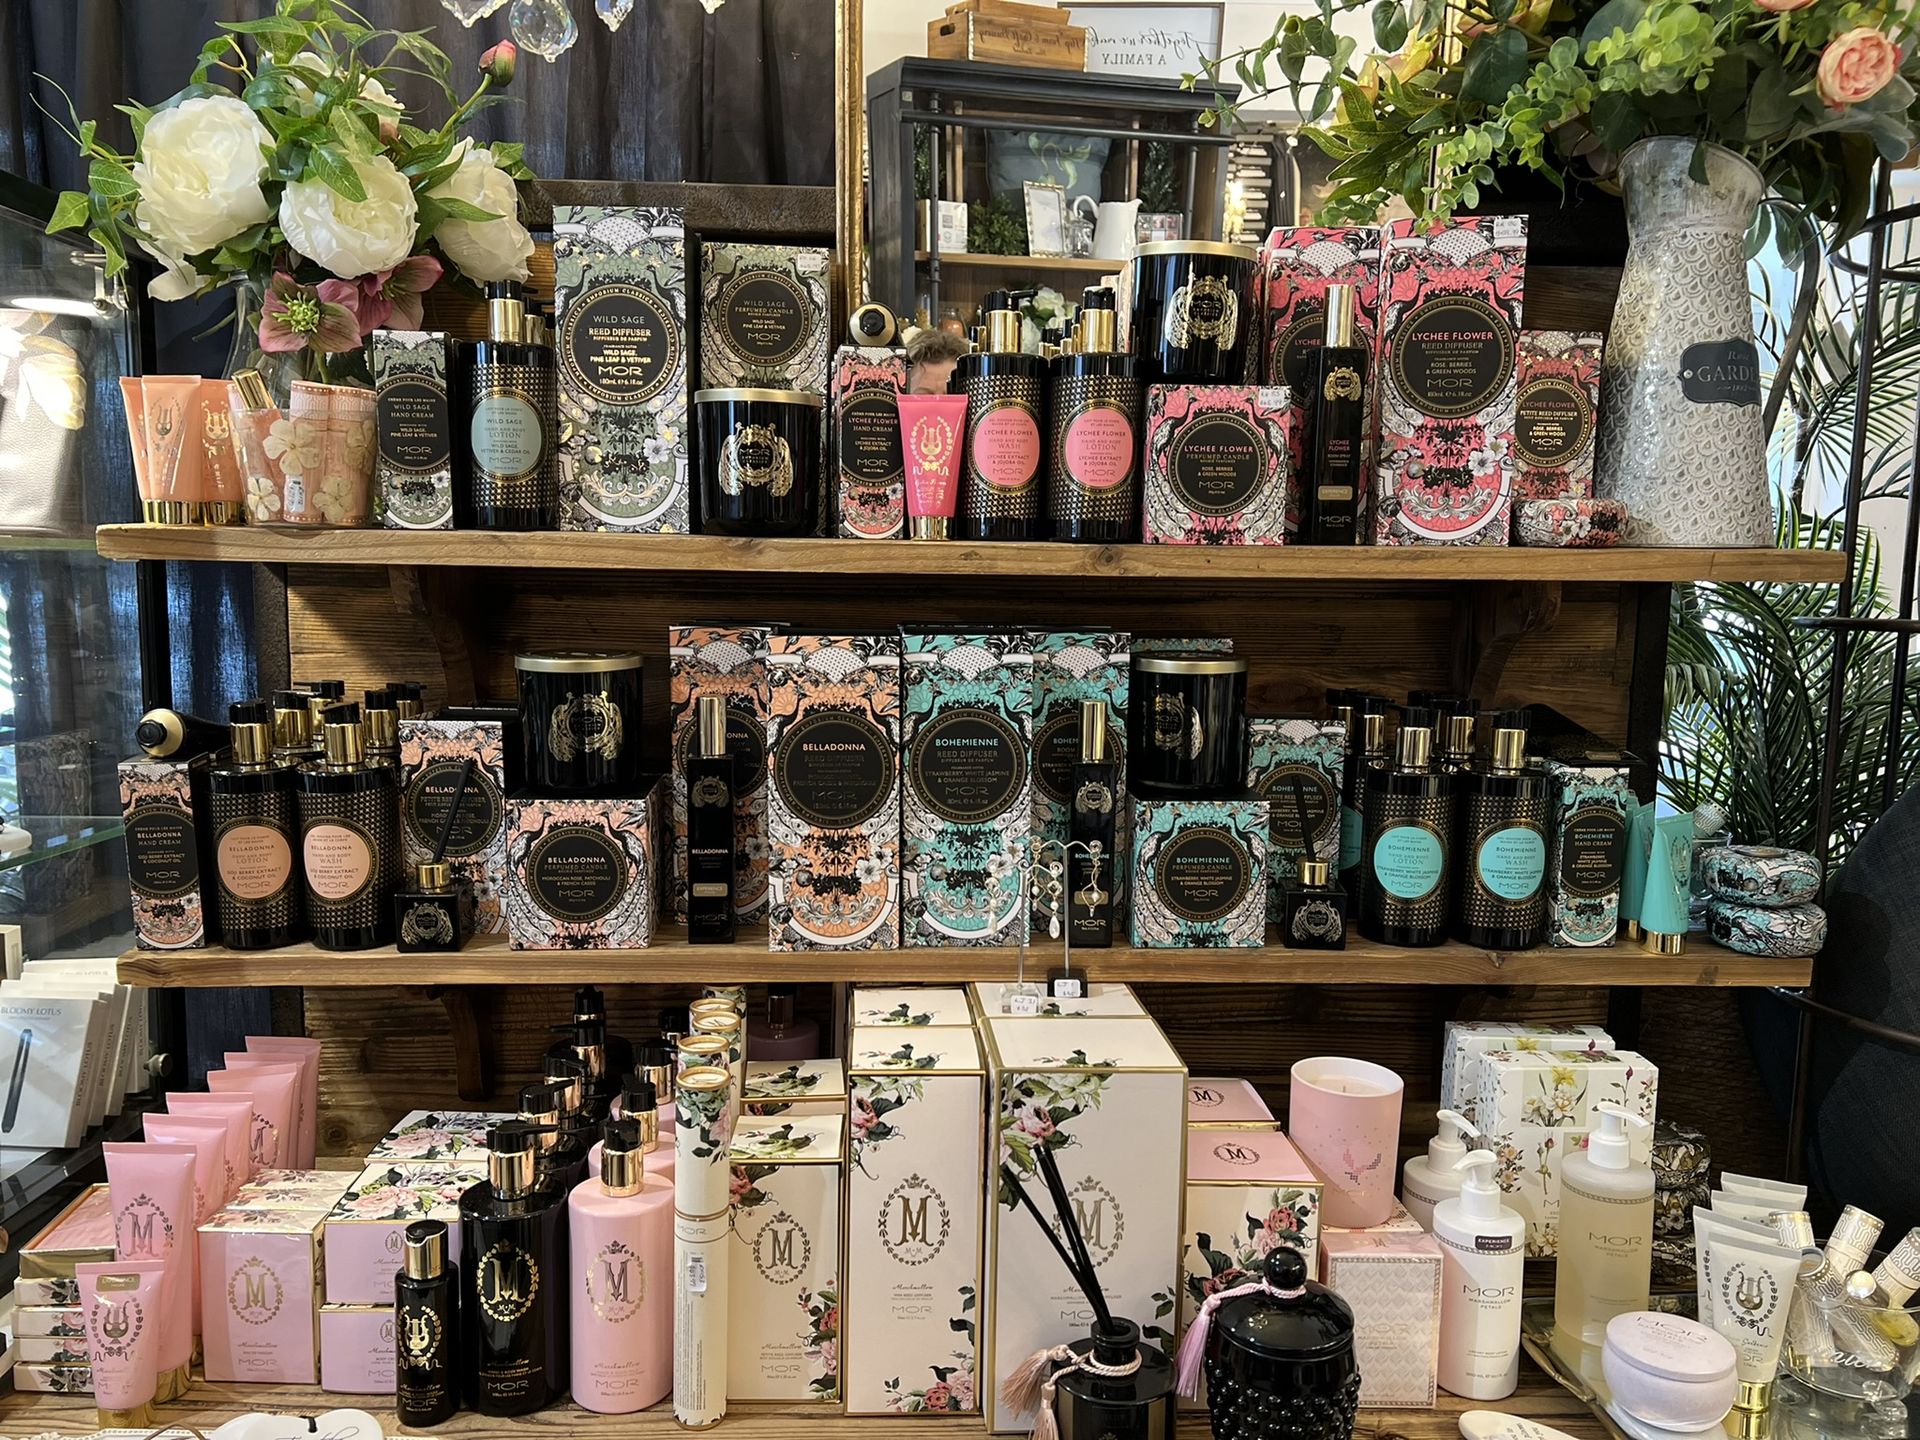 The full range of Mor products, hand cream, perfurme, diffusers and body wash - all smell beautiful